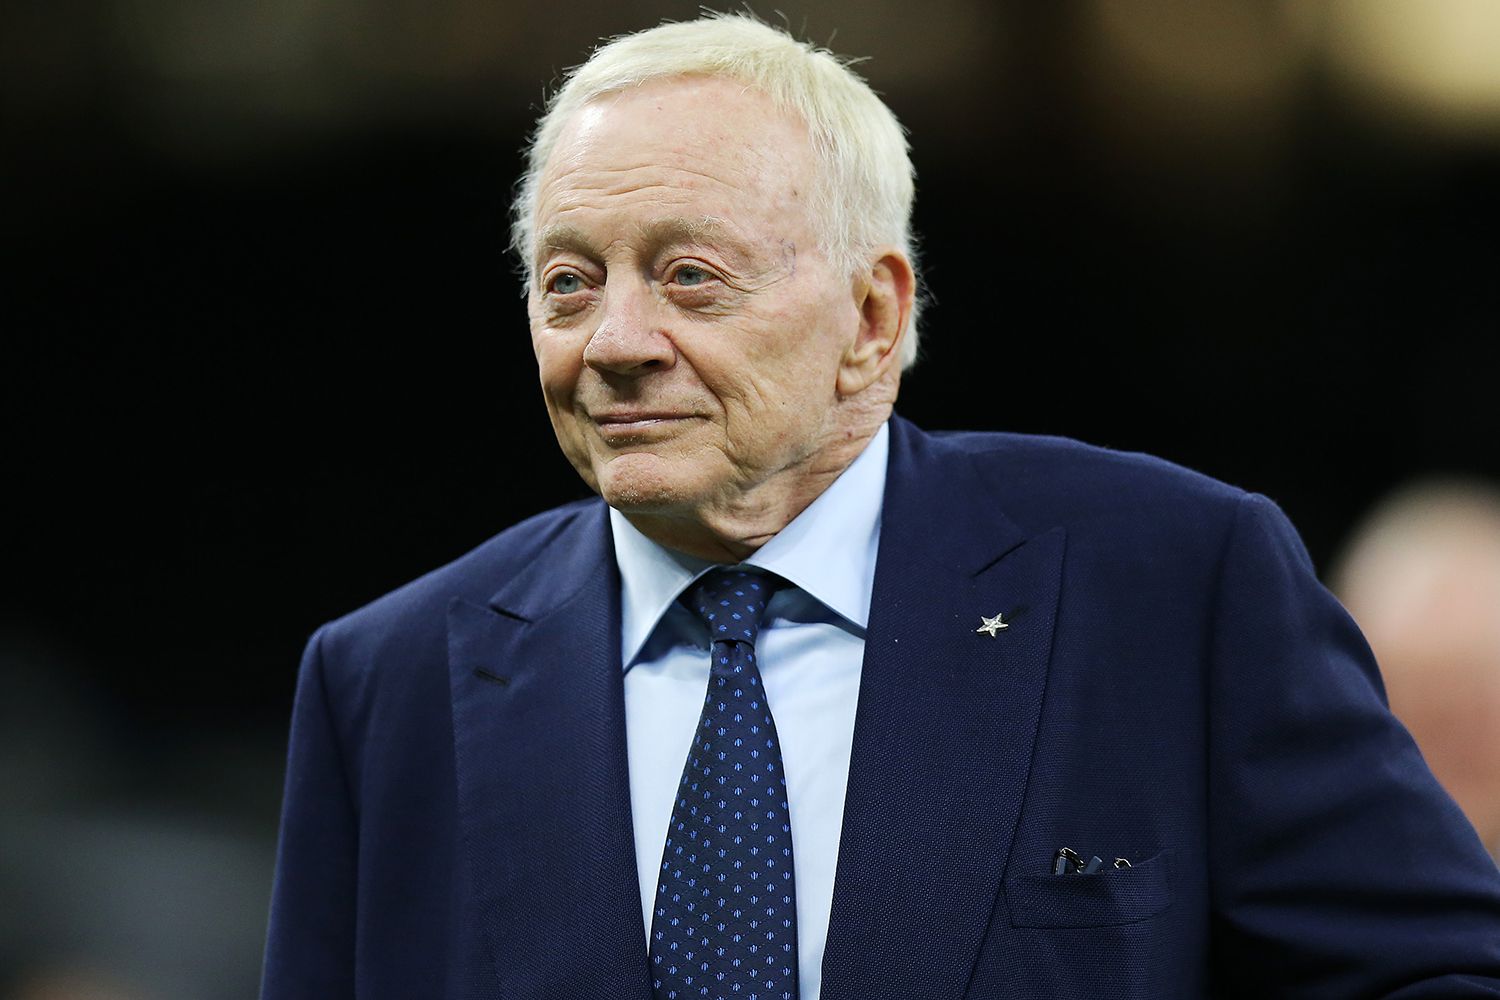 The Dallas Dilemma Jerry Jones' Crucial Decisions and Stephen A. Smith's Sharp Take